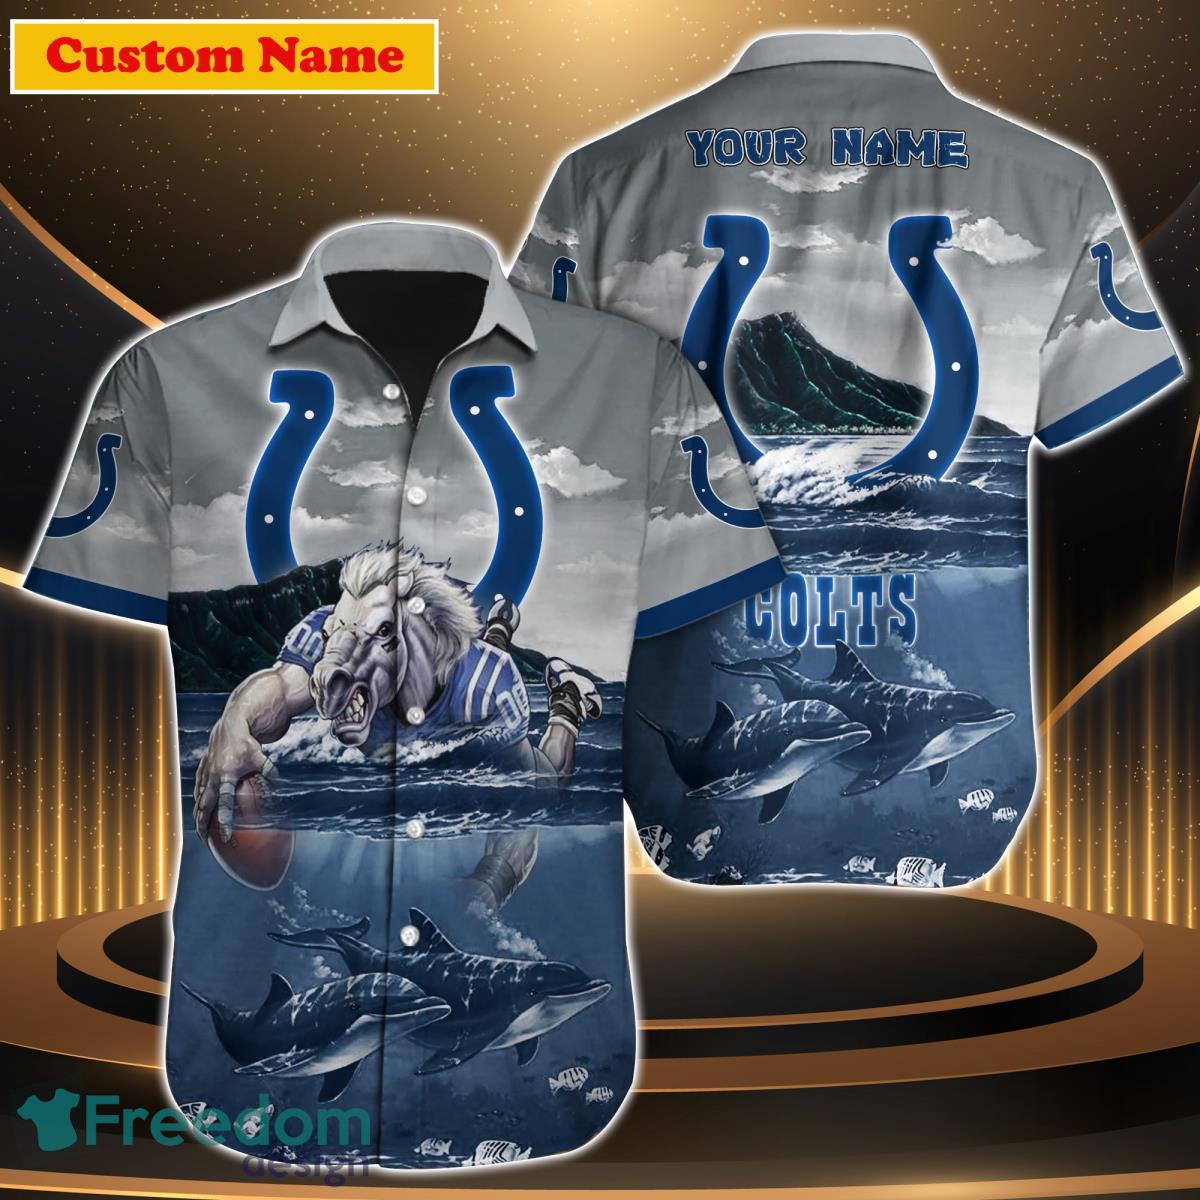 Personalized Indianapolis Colts Baseball Jersey Shirt For Fans